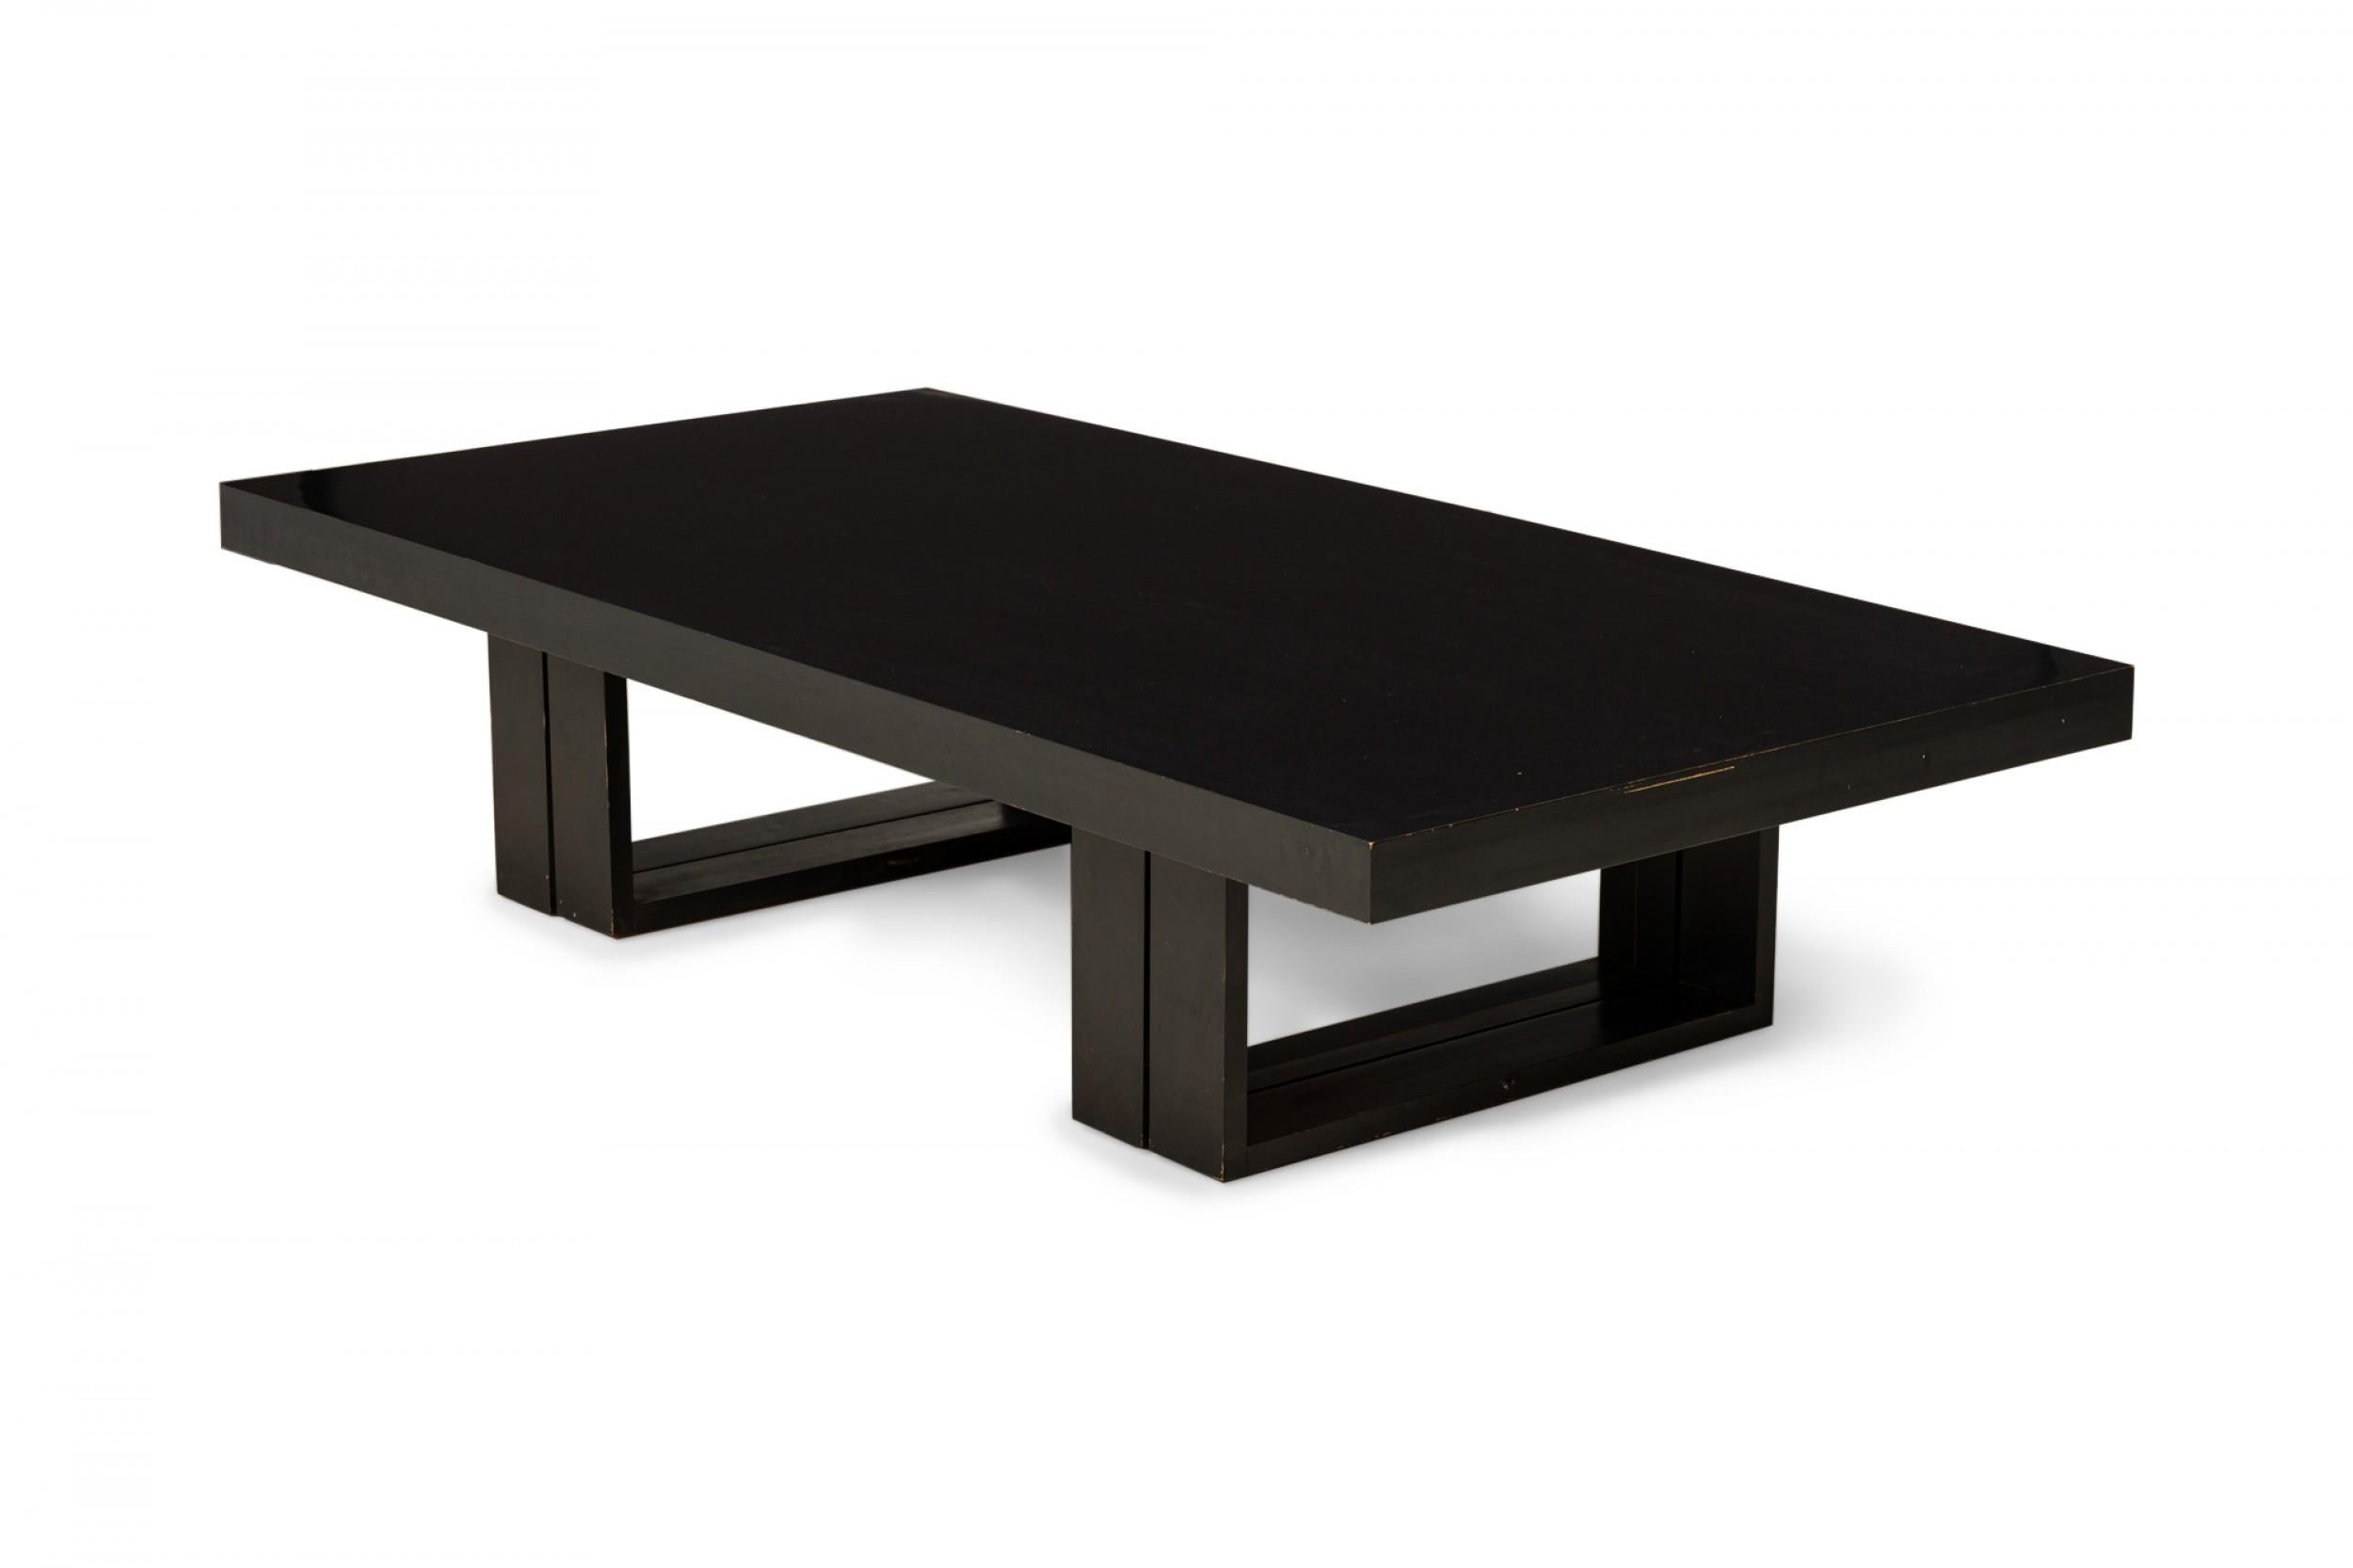 American Van Keppel Green VKG Ebonized Convertible Dining Table / Coffee Table For Sale